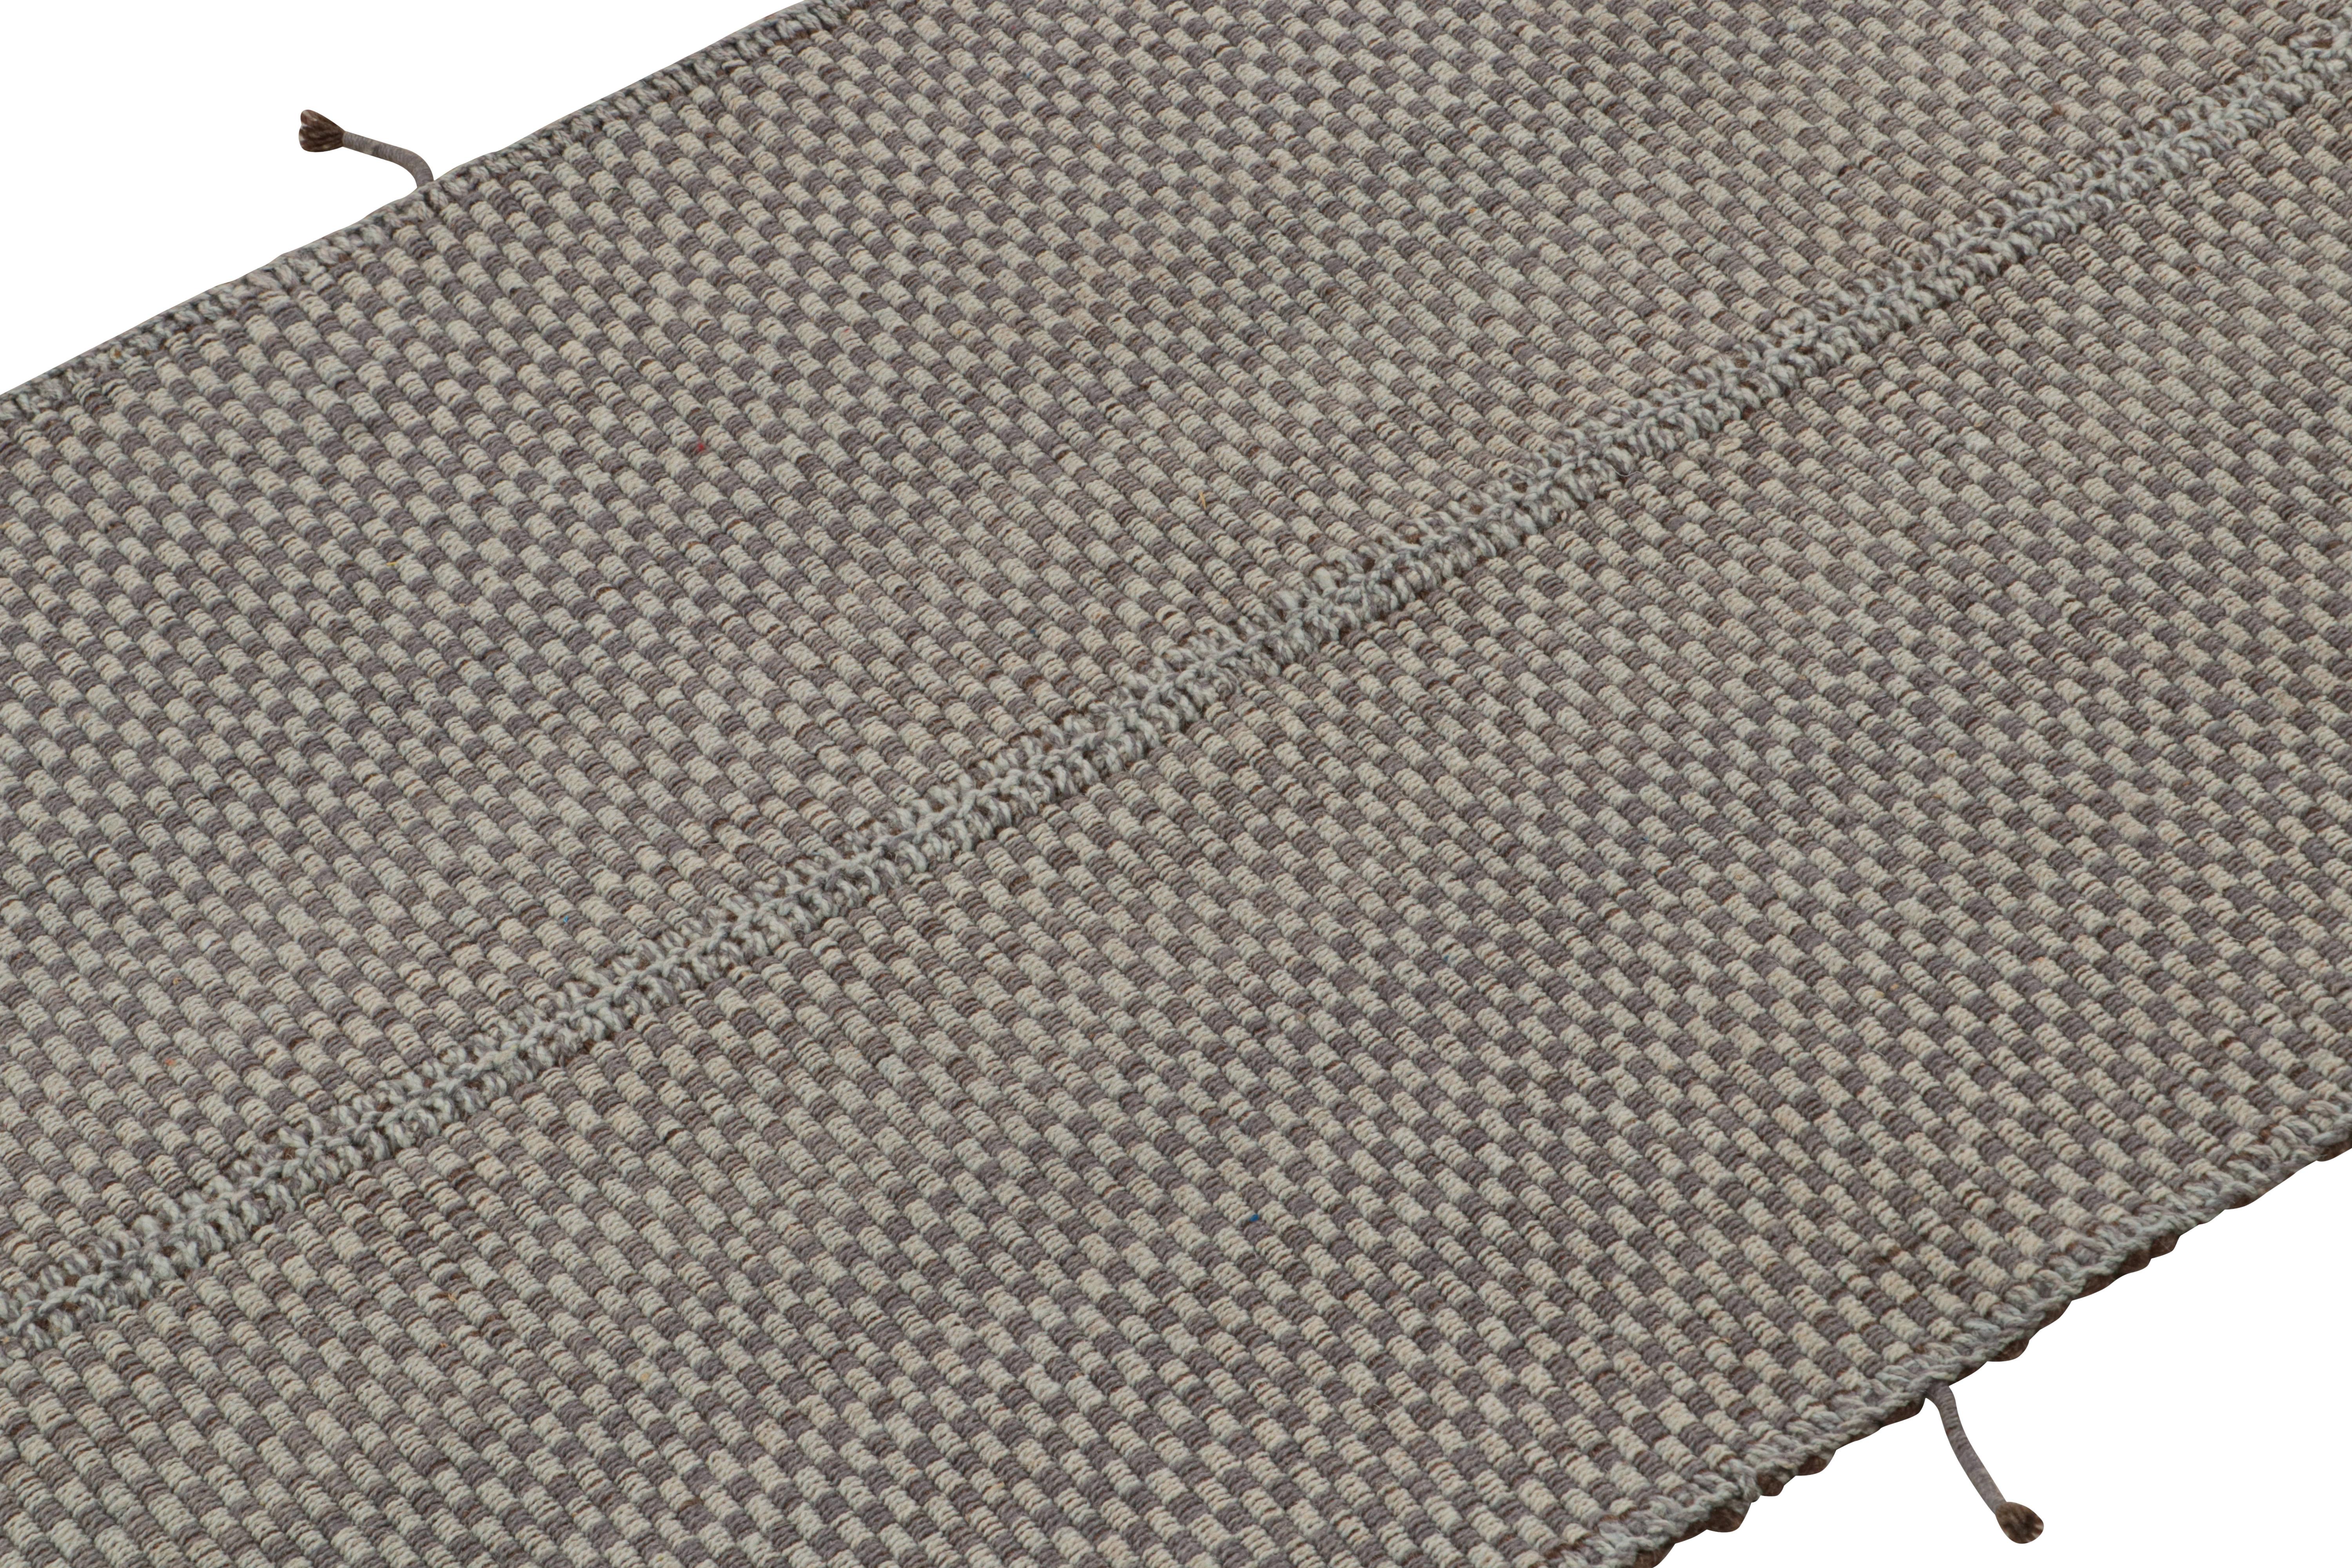 Handwoven in wool, a 3x6 Kilim design from an inventive new contemporary flat weave collection by Rug & Kilim.

On the Design: 

Fondly dubbed, “Rez Kilims”, this modern take on Classic panel-weaving enjoys a fabulous, unique play of gray with blue